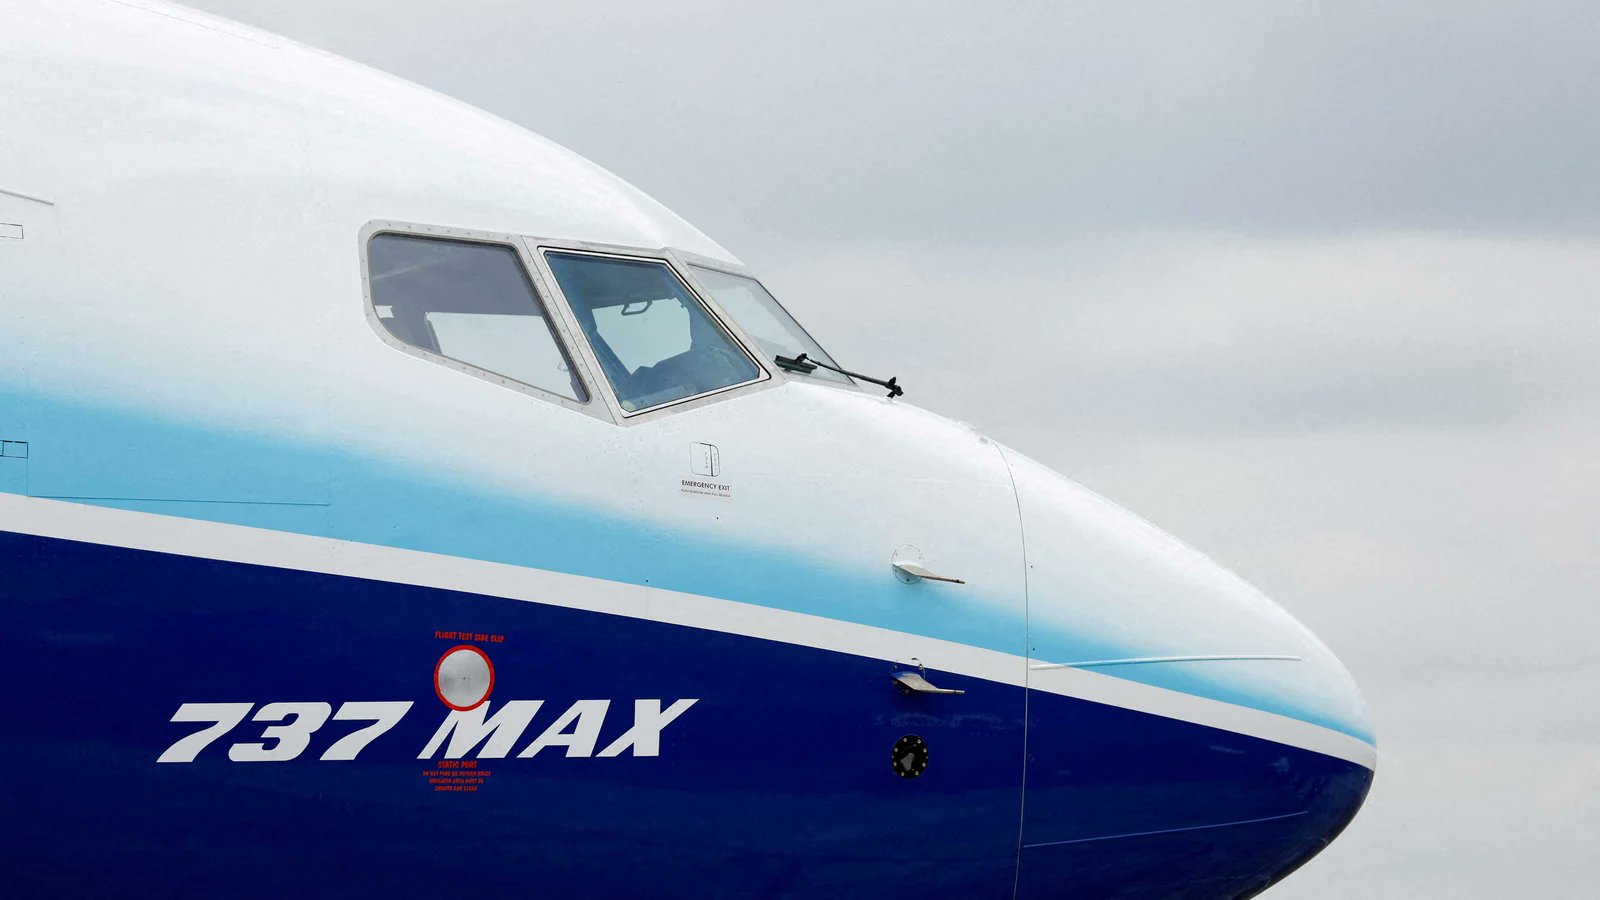 Elongated  Fastener  Holes on the aft  Pressure bulkhead is the new Quality issue with a Batch of Boeing B737 Max Planes.